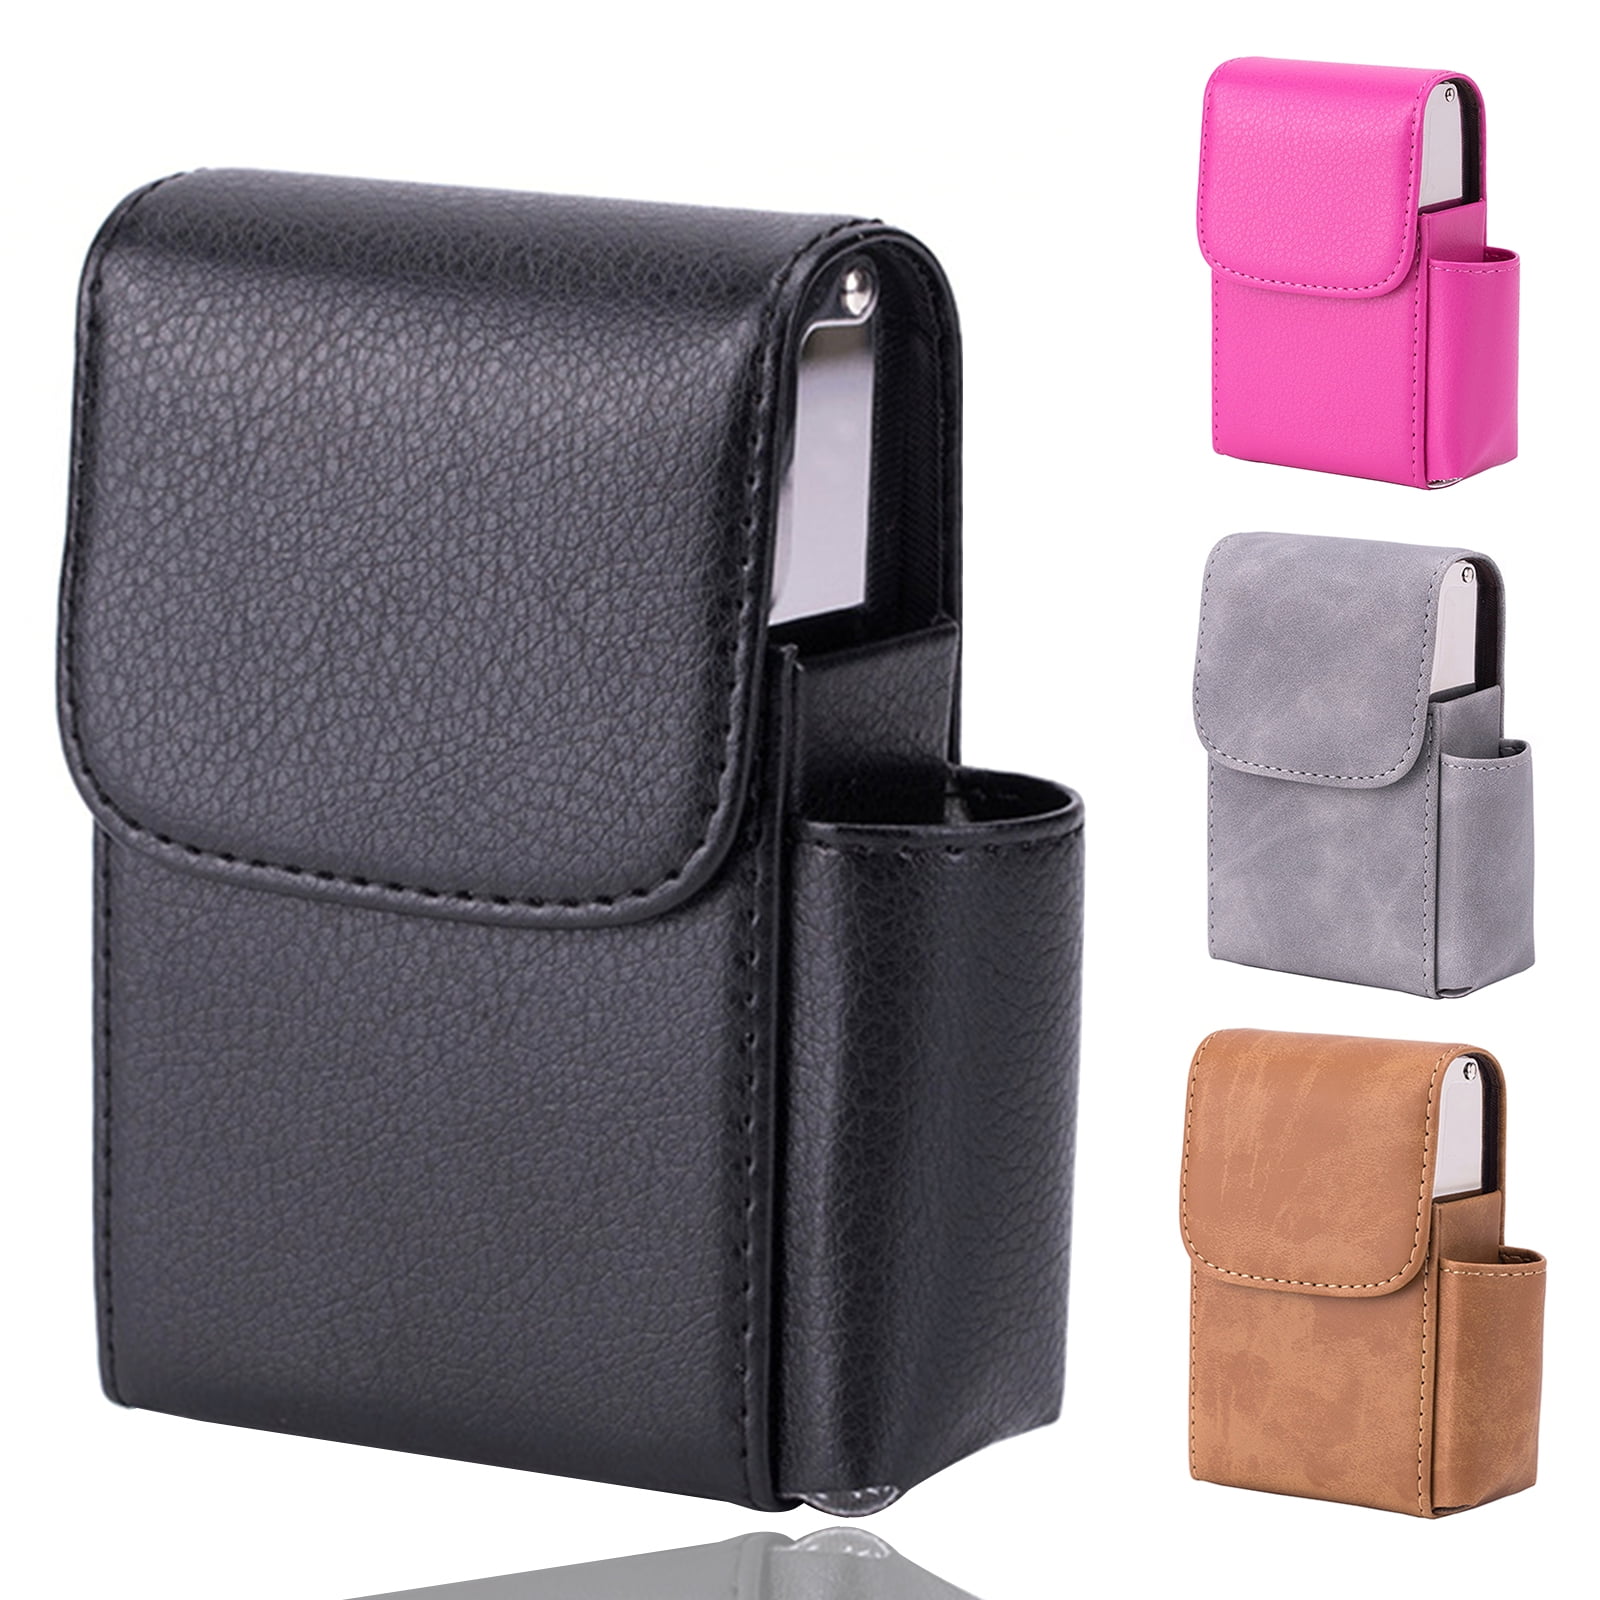 Tobacco Pouch Belt Holster 